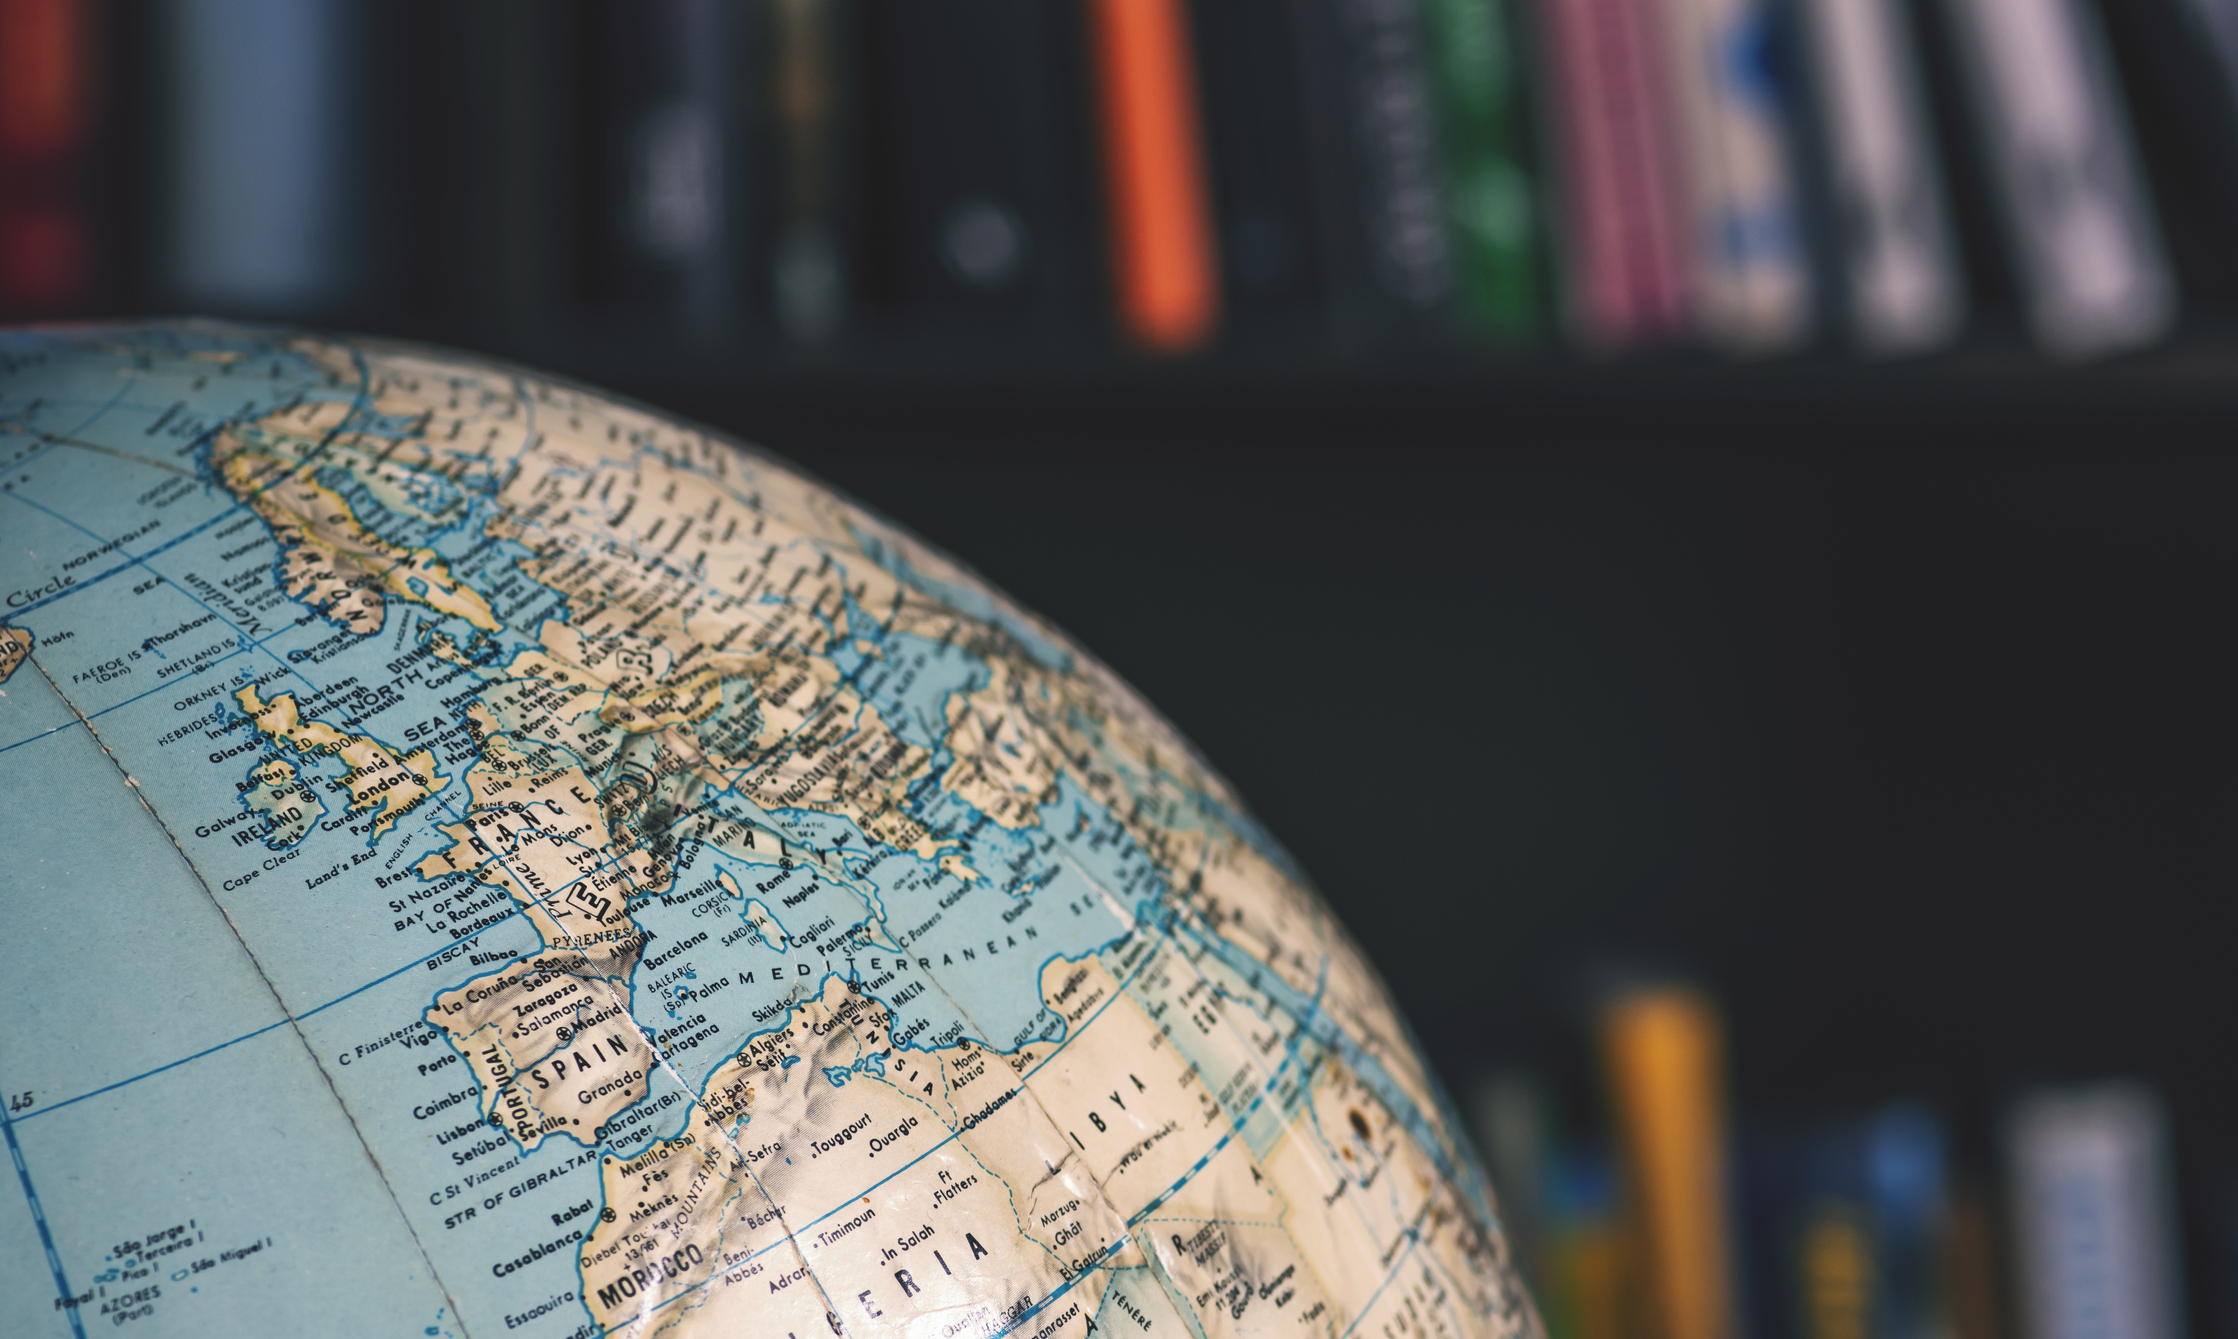 Close-up photo of a globe of the world seen in the foreground with a large shelf full of books in the background.